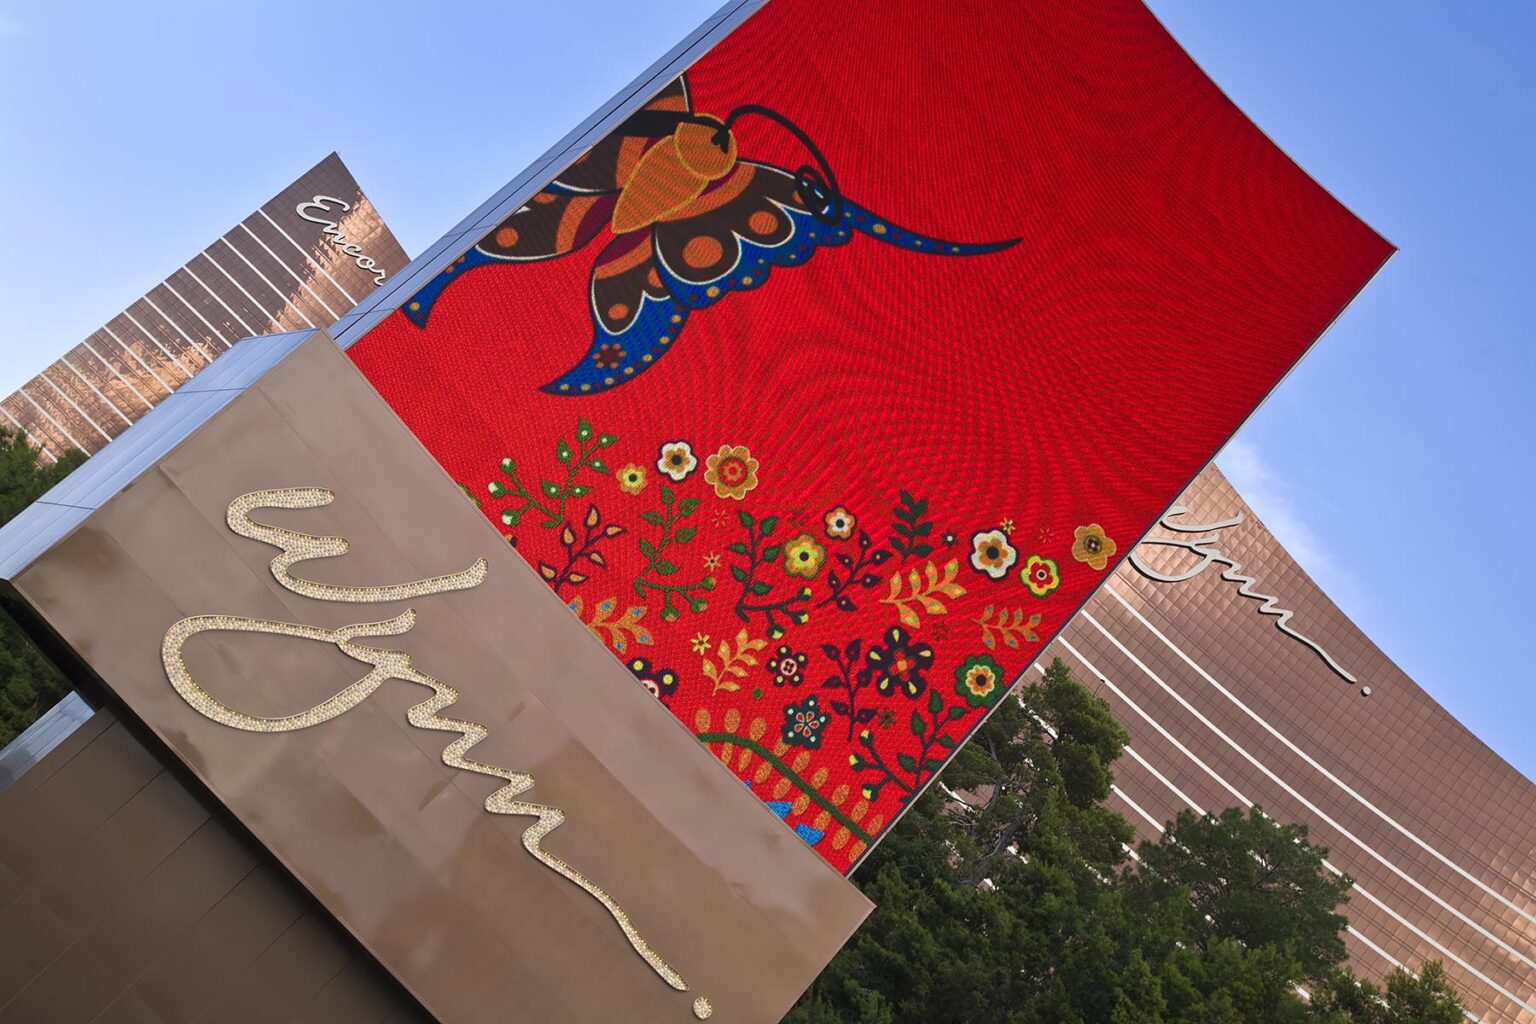 NEON SIGN and the exterior of the WYNN HOTEL and CASINO - LAS VEGAS, NEVADA